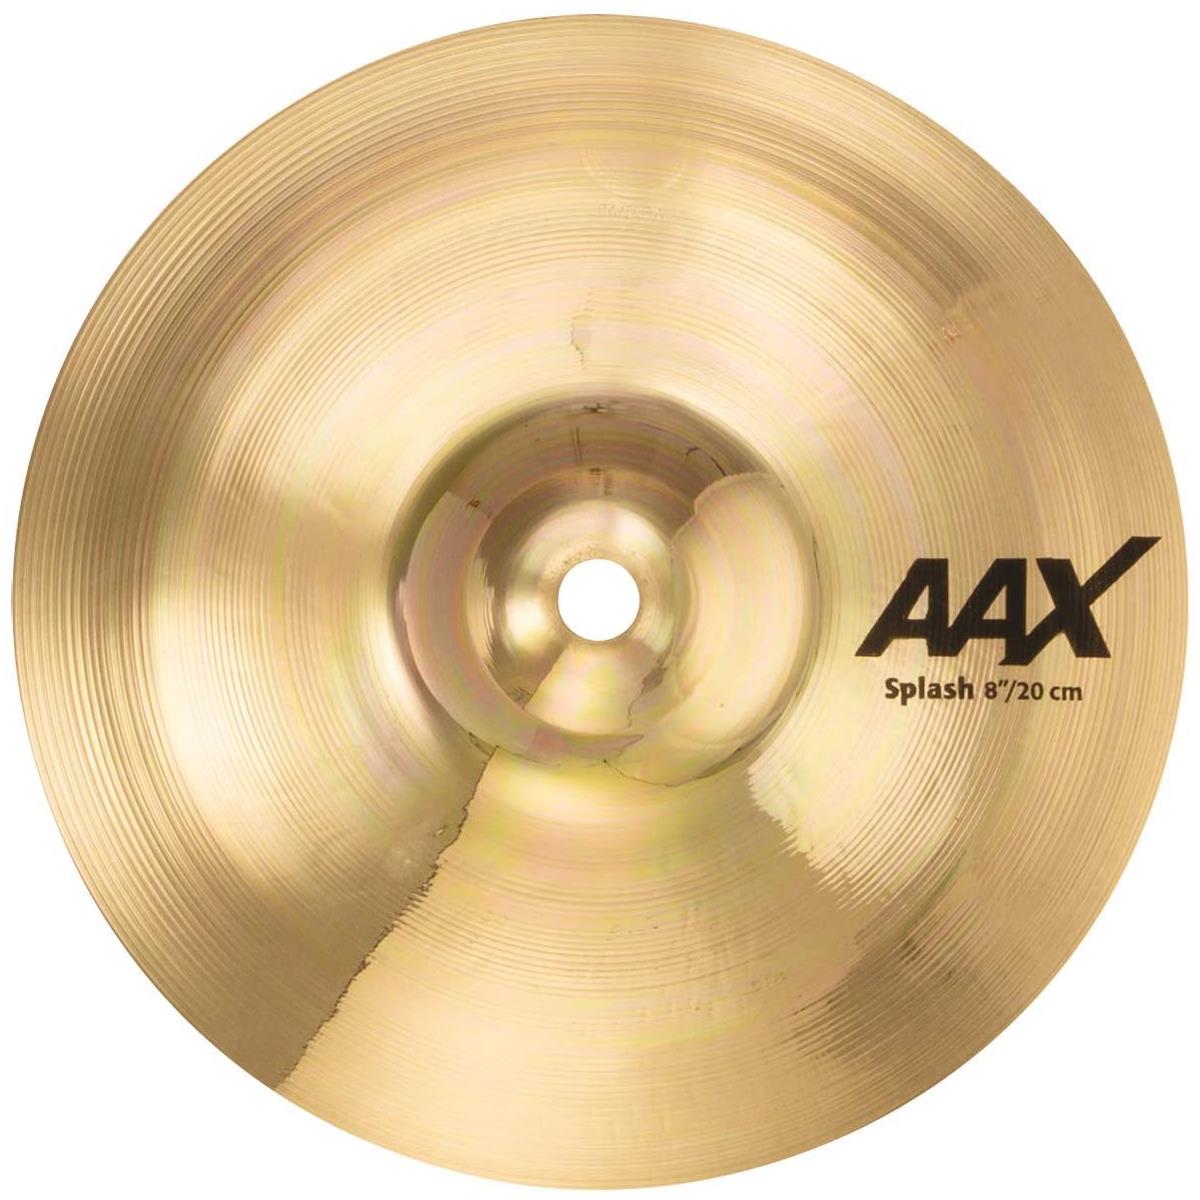 Sabian 8" AAX Splash Cymbal, Extra-Thin, Brilliant Finish Extremely fast and very bright, the SABIAN 8" AAX Splash provides plenty of penetrating cut. The SABIAN AAX series delivers consistently bright, crisp, clear and cutting responses - AAX is the ultimate Modern Bright sound!